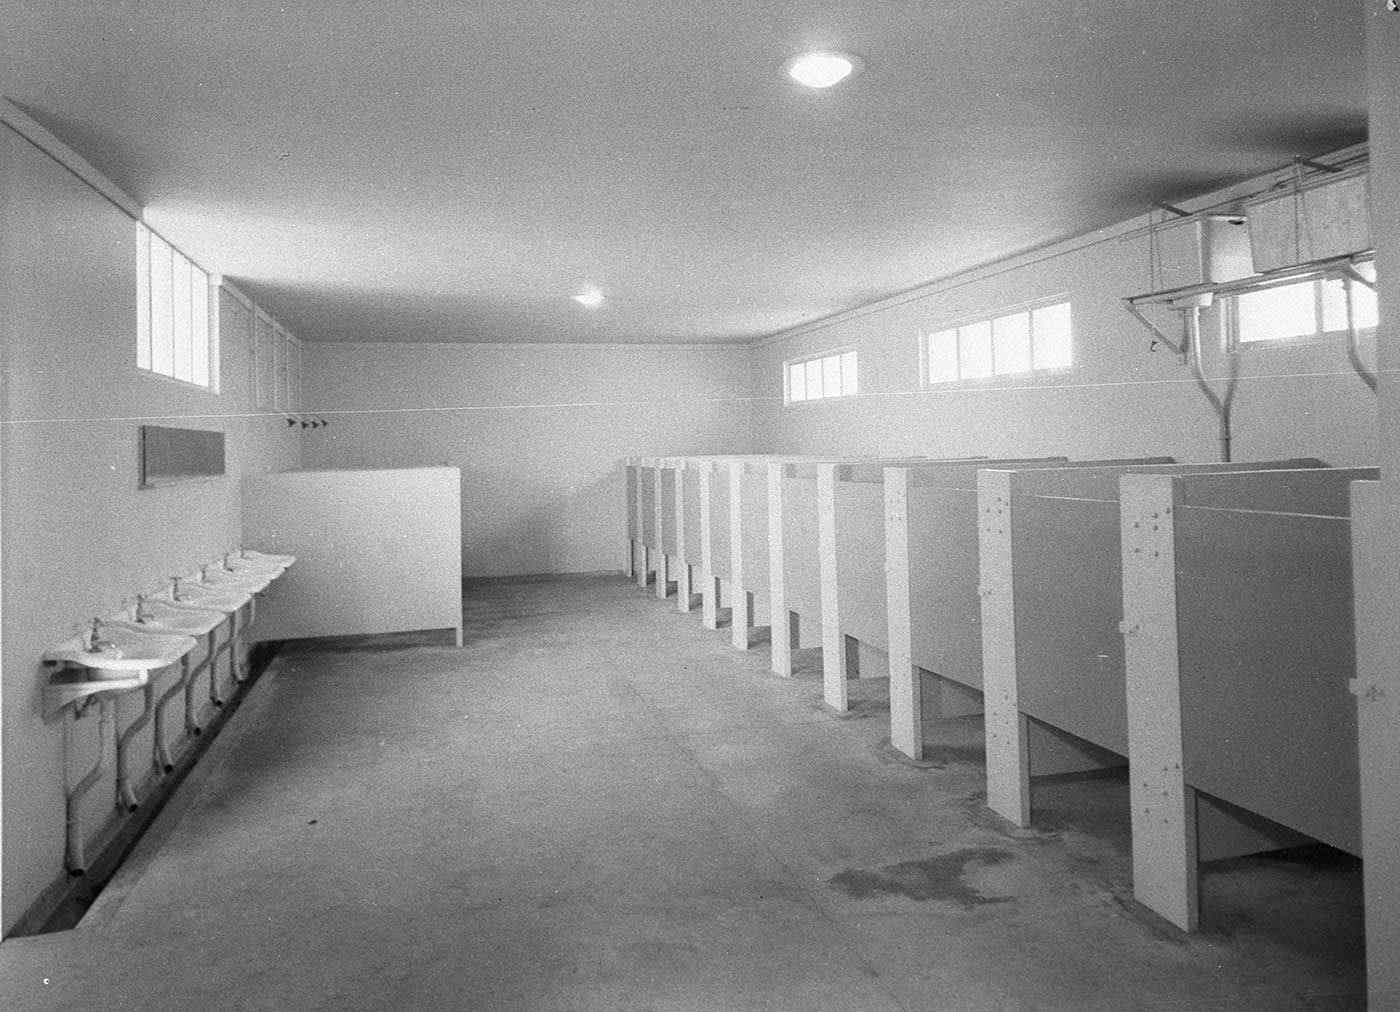 Black and white image showing a large white-walled room with a concrete floor. A row of six sinks lines the left wall and a row of partitions and doors lines the right. - click to view larger image